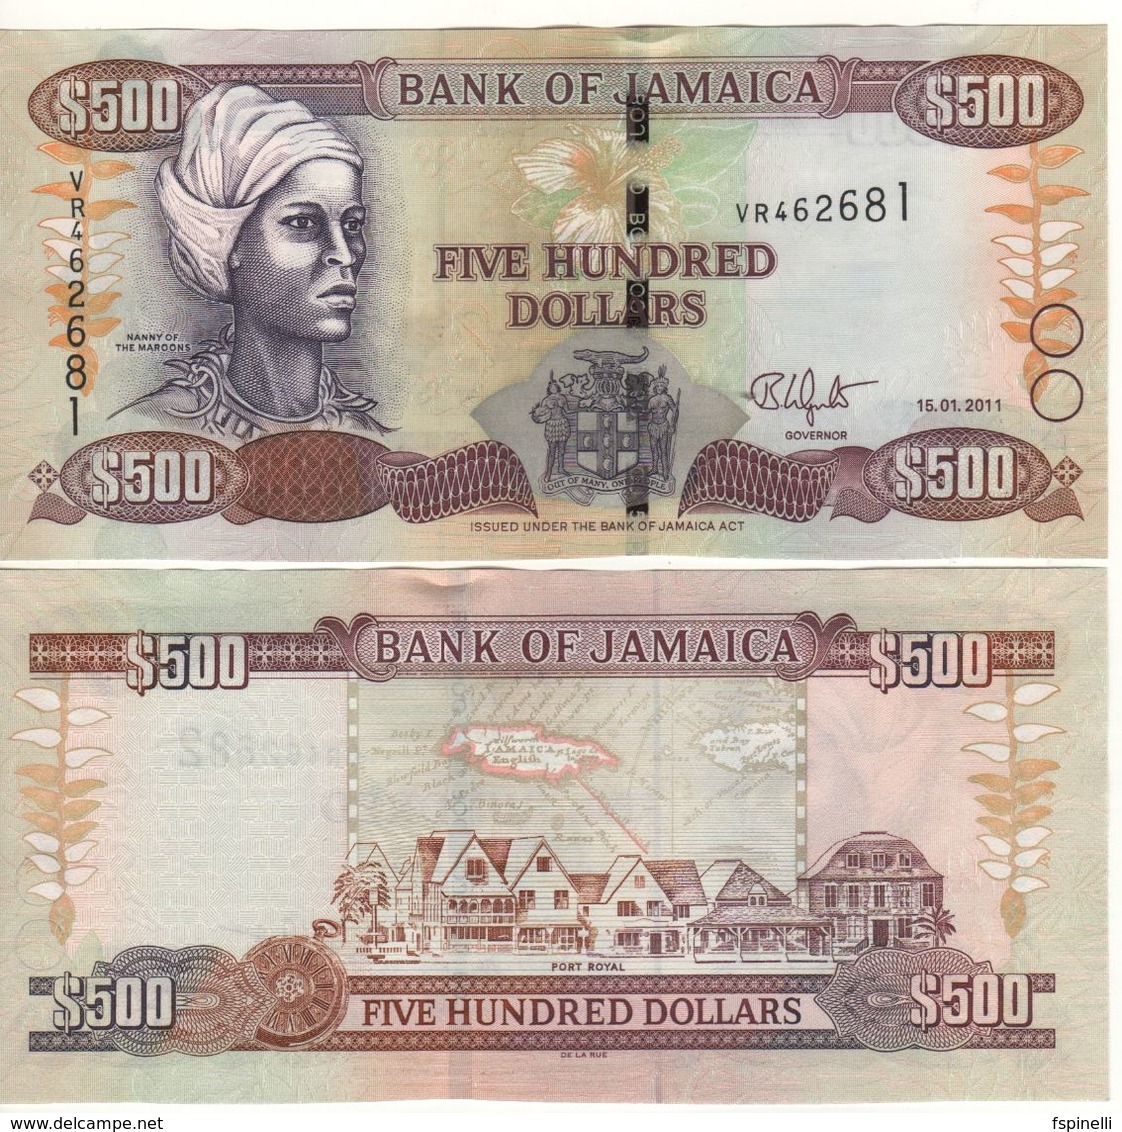 JAMAICA  500 Dollars  P85h  Dated 15.01.2011  ( Nanny Of The Maroons - Port Royal )   UNC - Jamaica